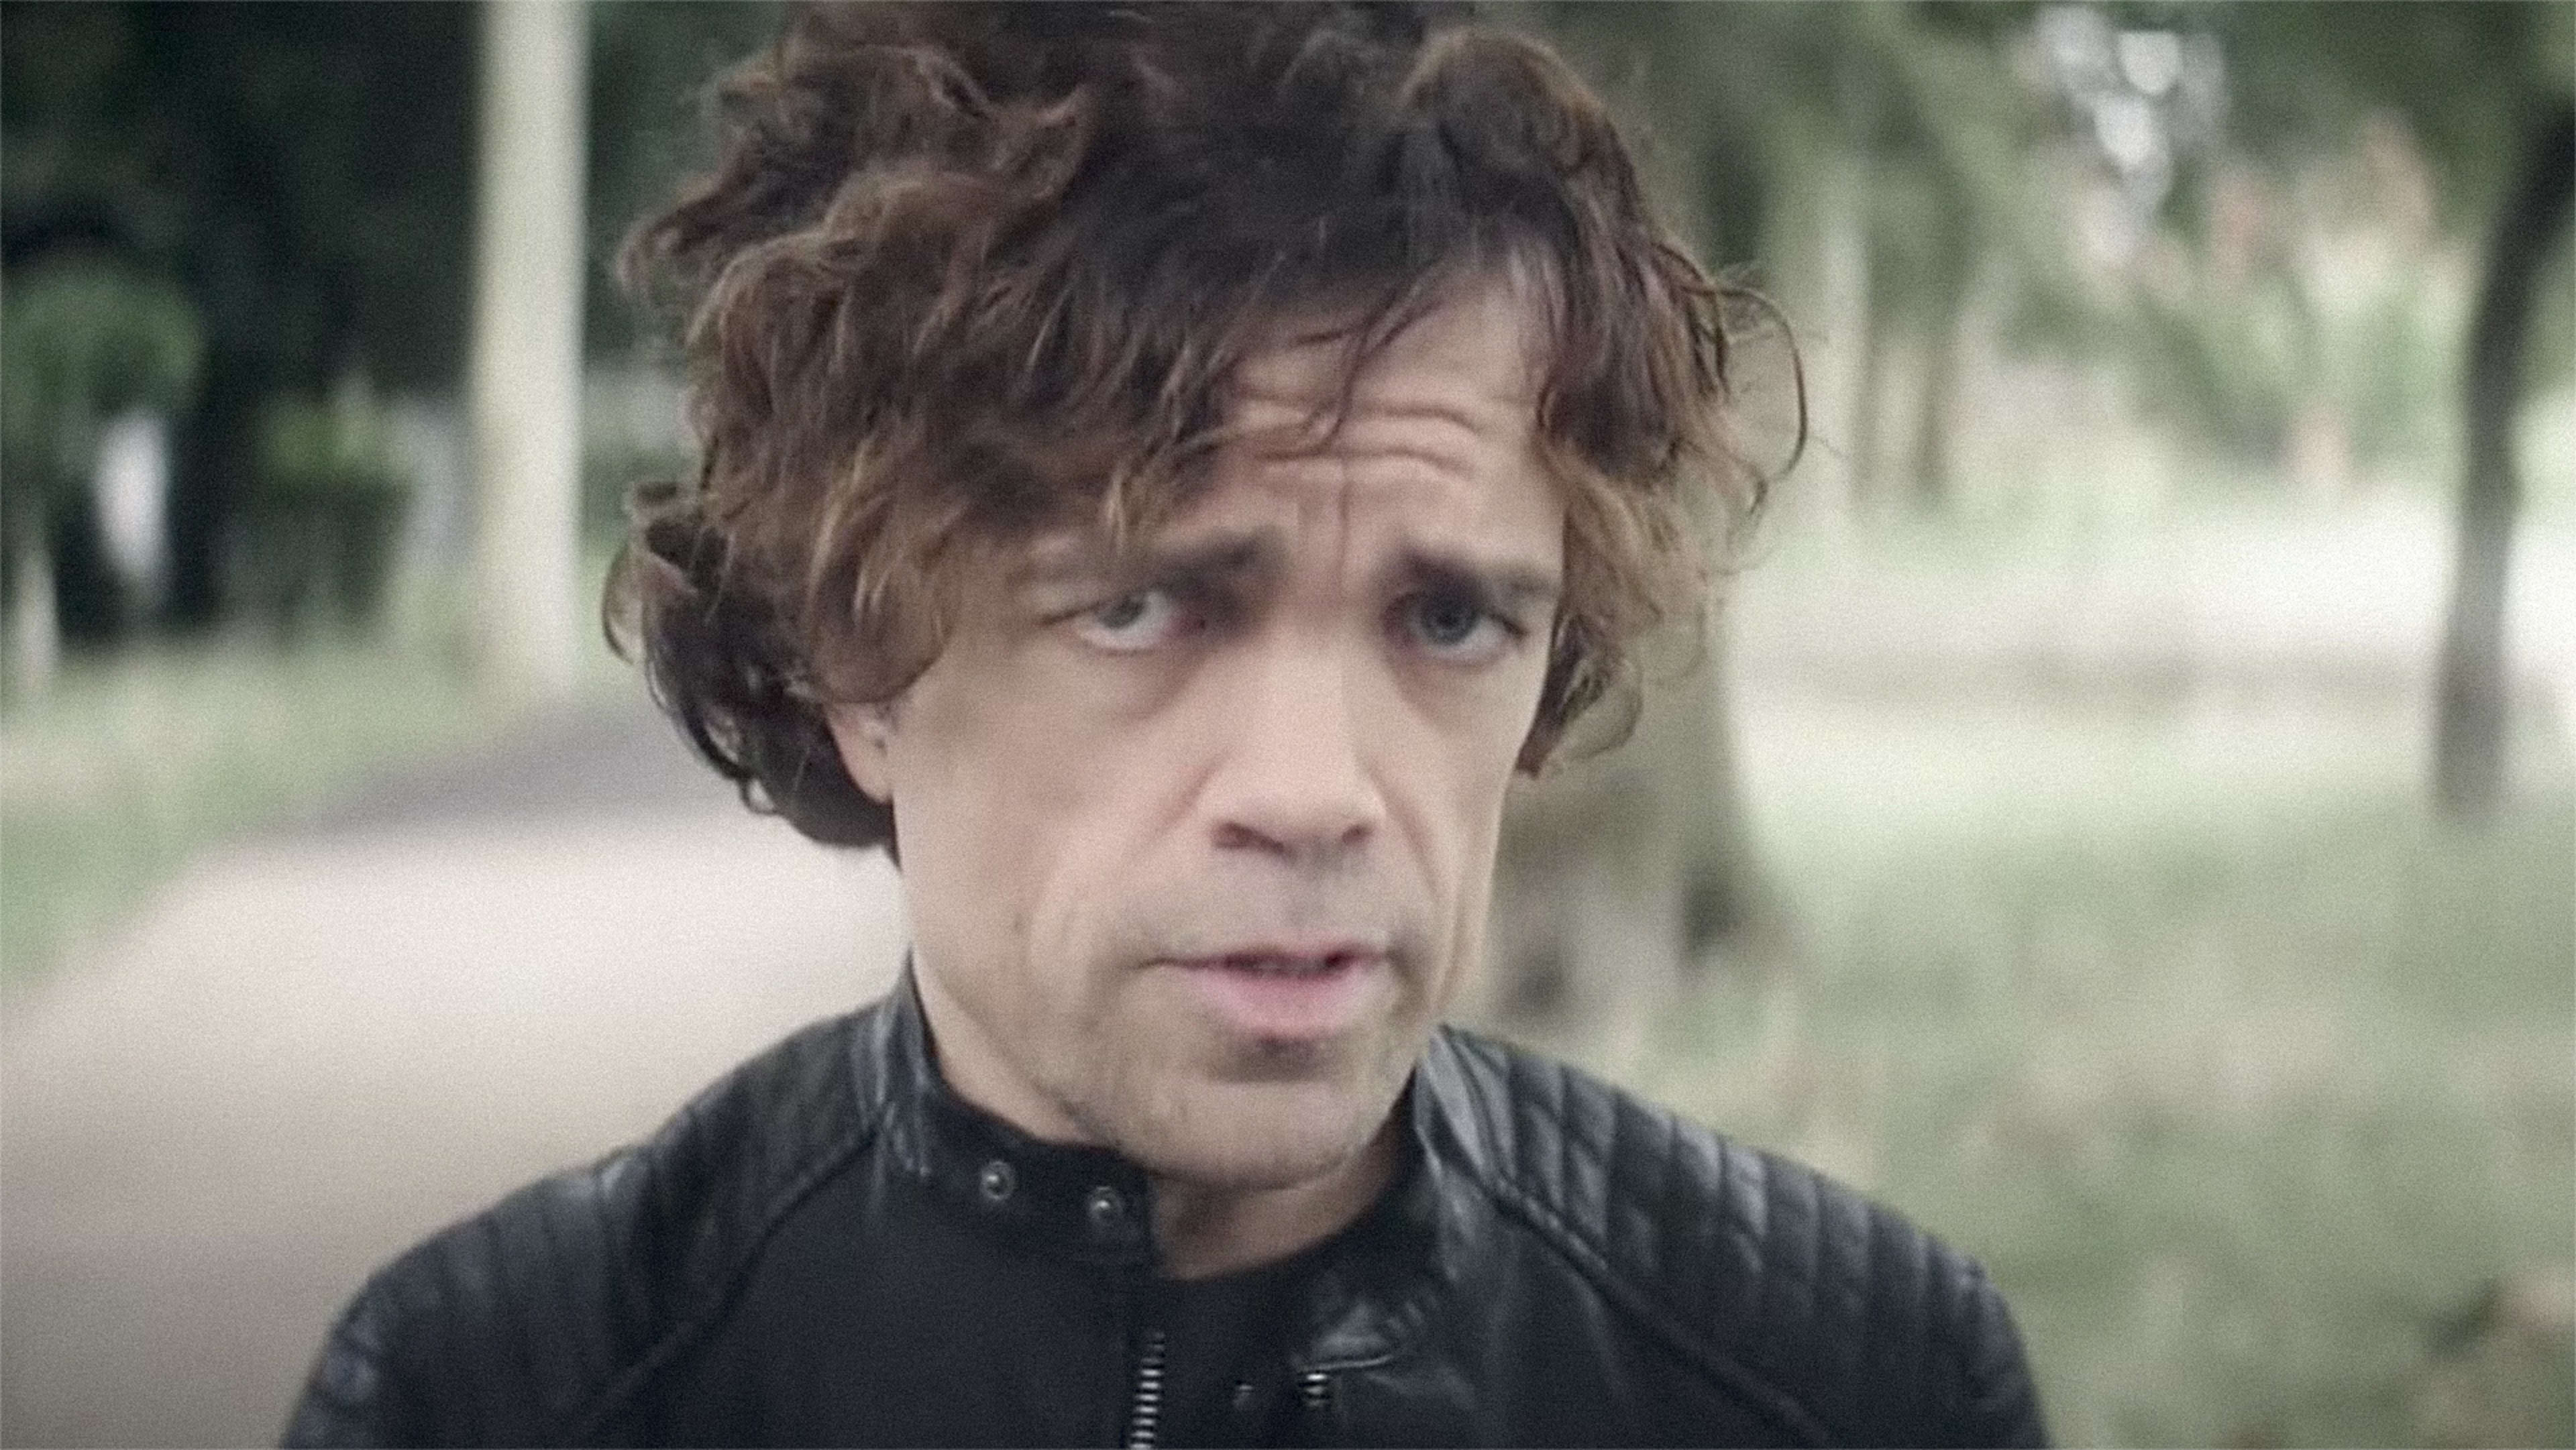 Peter Dinklage Calmly Contemplates The Connected World For Cisco